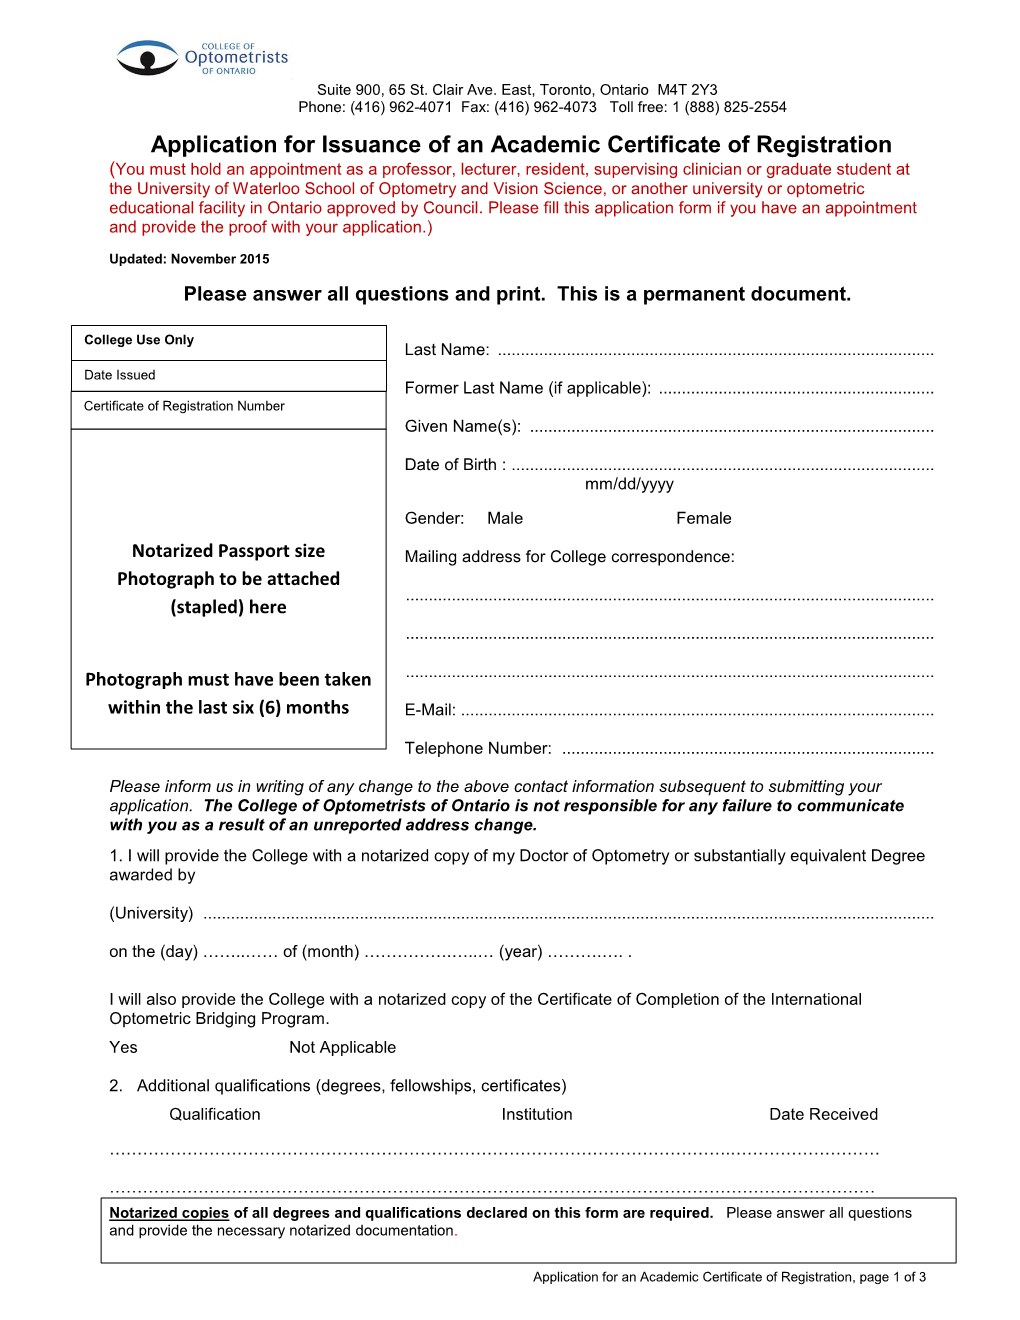 Application for Issuance of an Academic Certificate of Registration